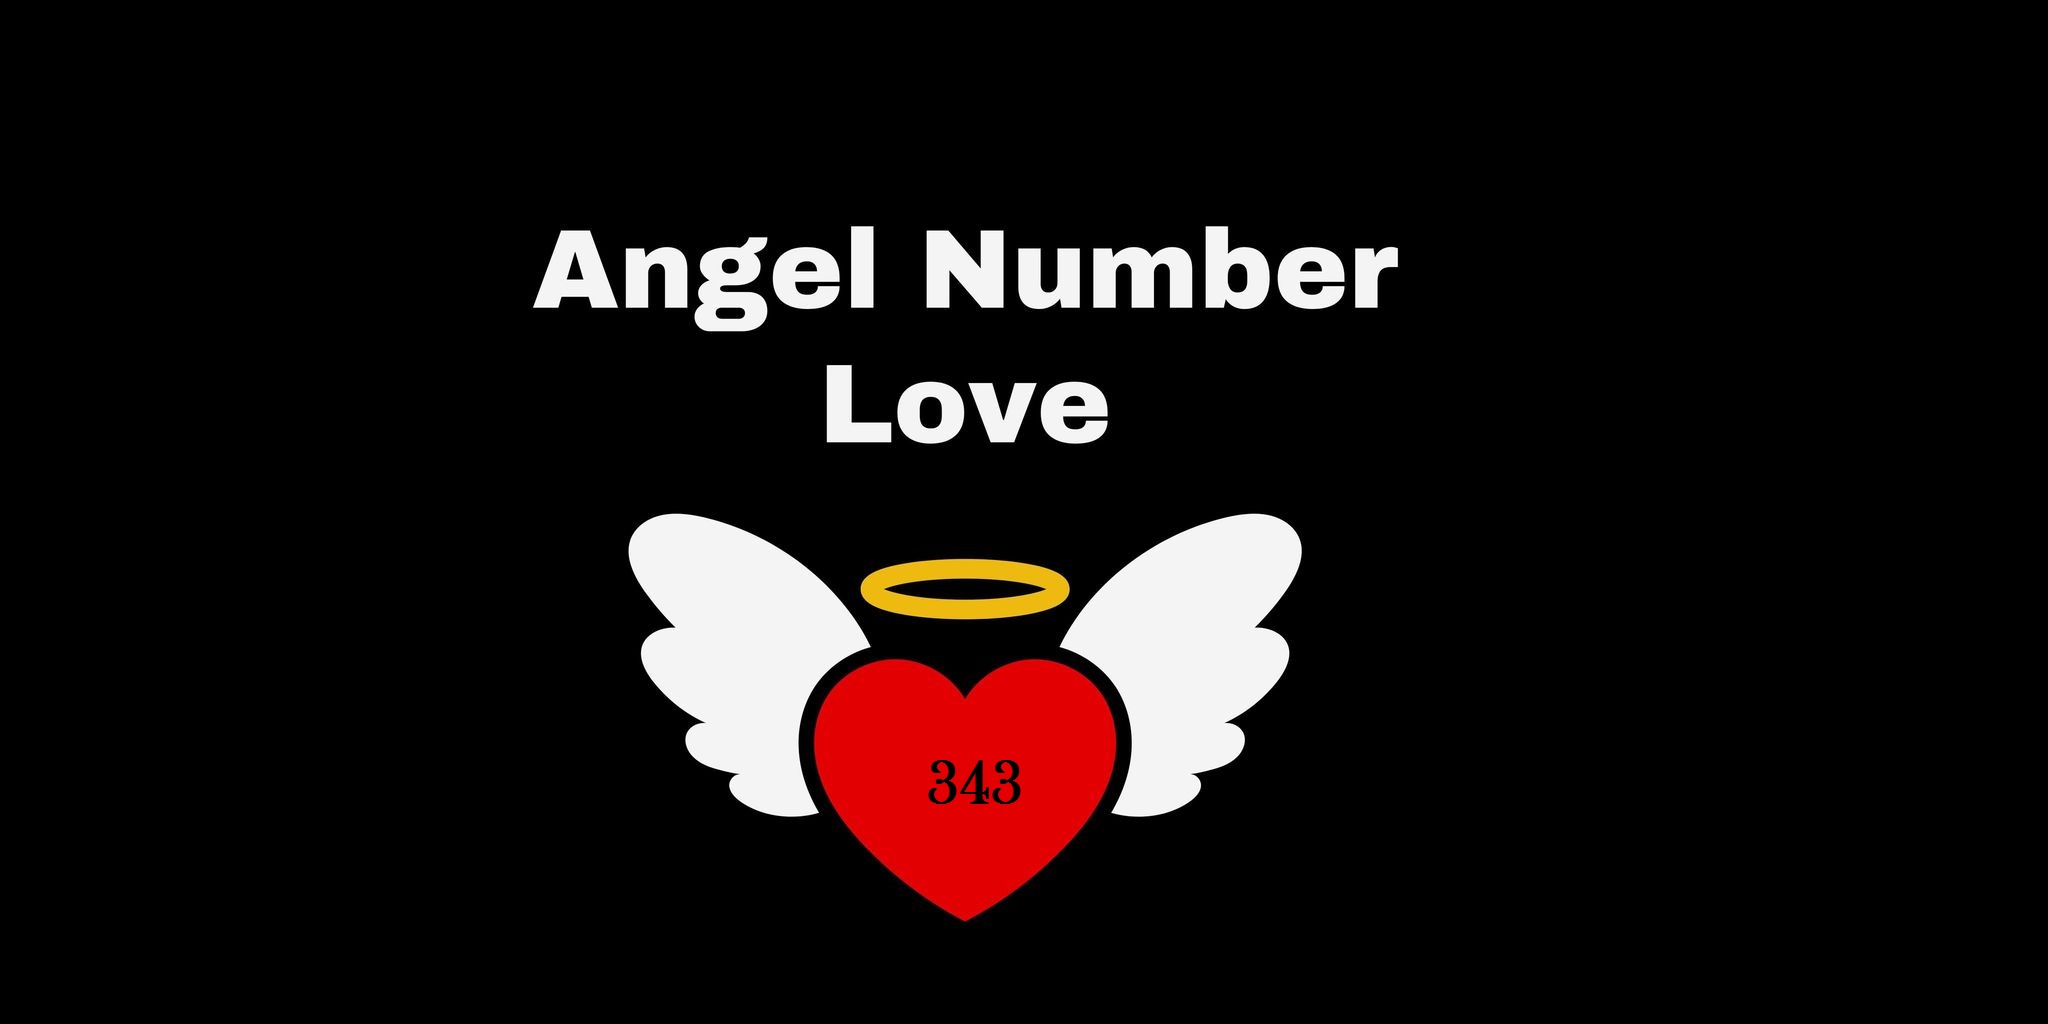 343 Angel Number Meaning In Love